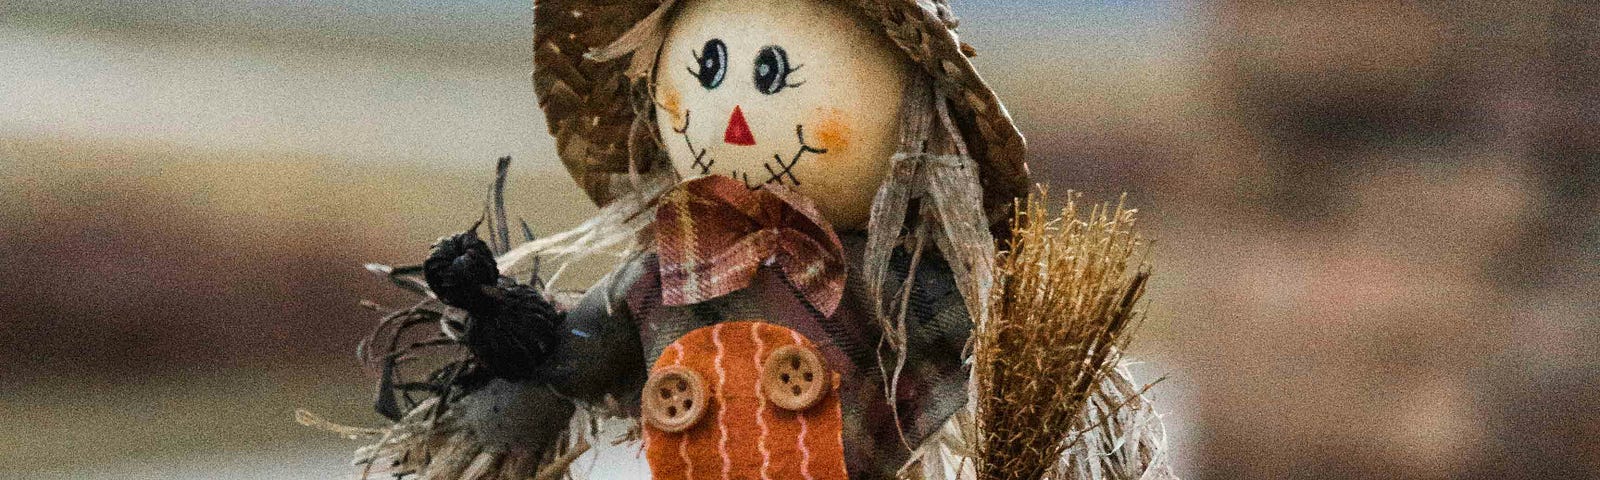 very friendly looking scarecrow